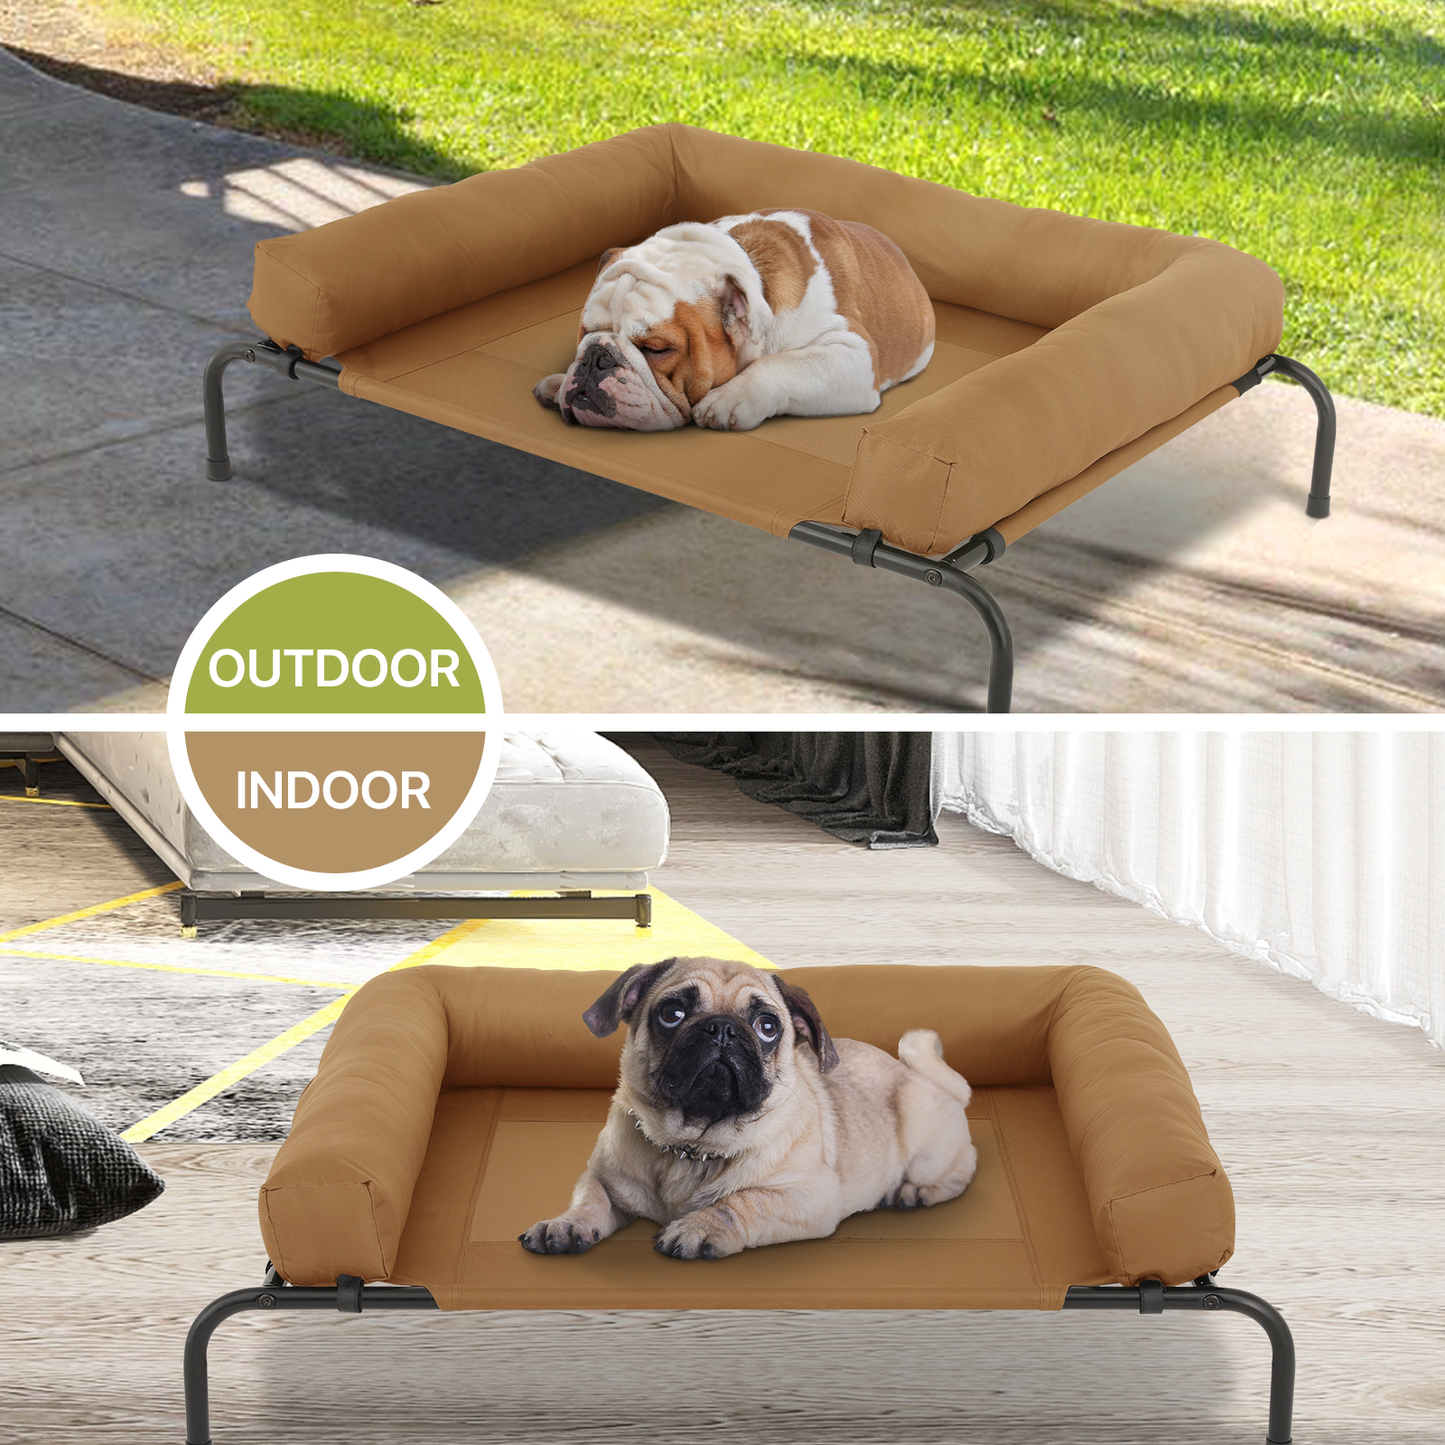 Elevated Dog Bed - w/ Removable Bolster - 42'' Length